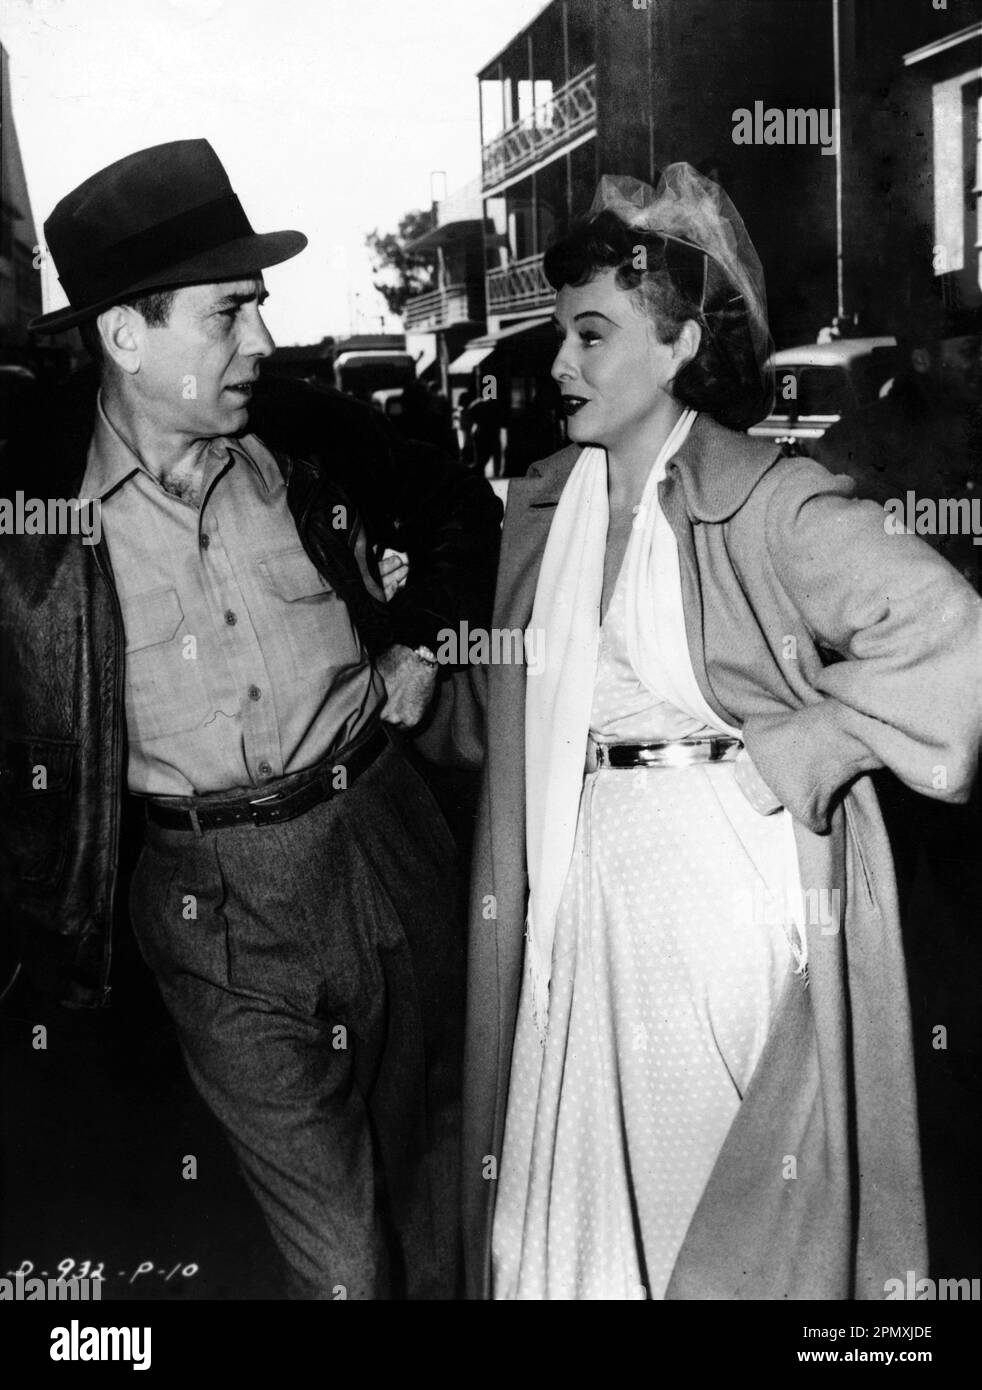 HUMPHREY BOGART (in costume for TOKYO JOE) and PAULETTE GODDARD (in costume for ANNA LUCASTA) in January 1949 on Columbia Studios Lot during break in filming publicity for Columbia Pictures Stock Photo